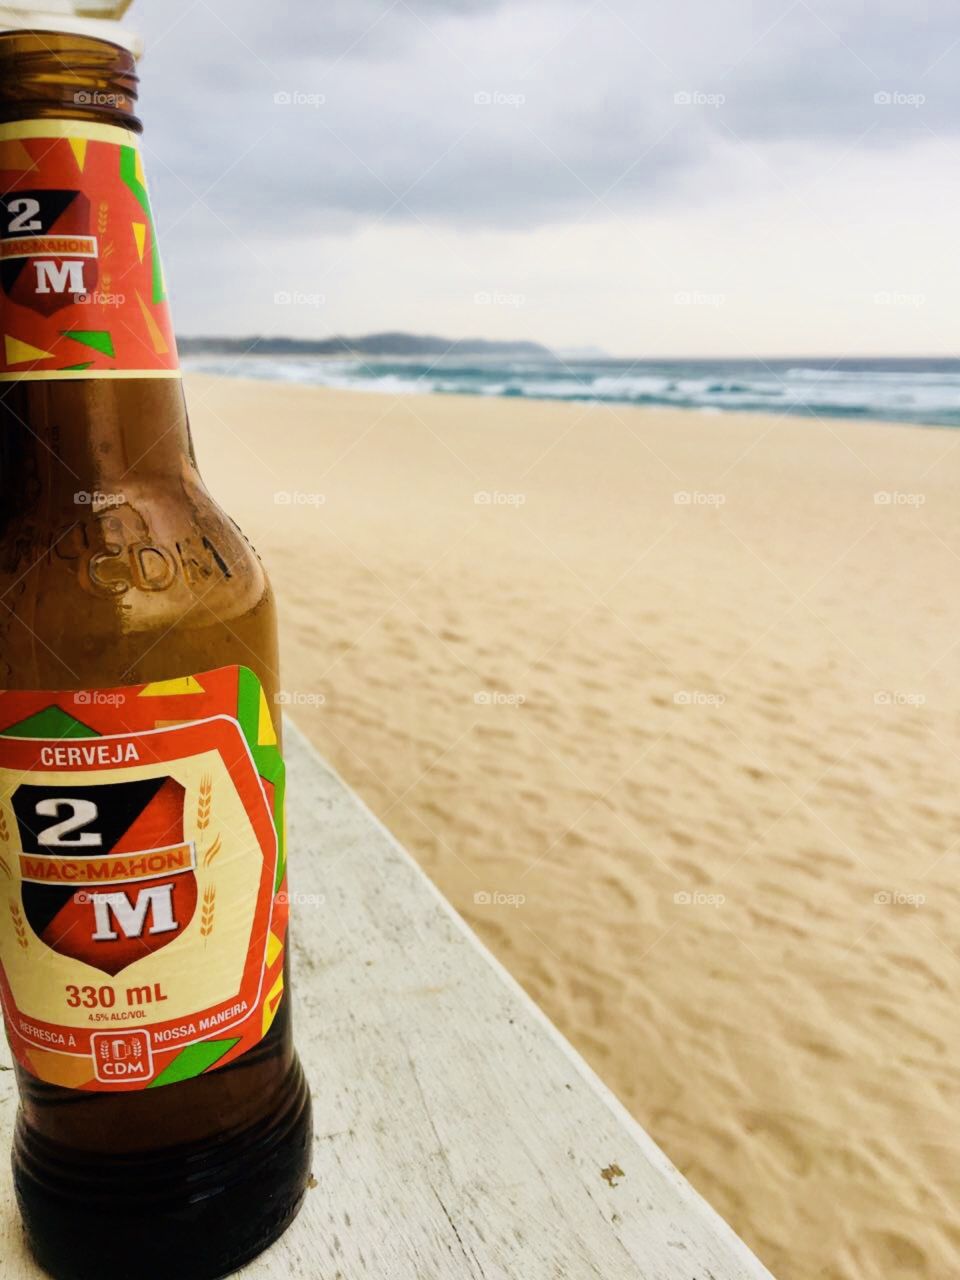 Mozambique beach and beer